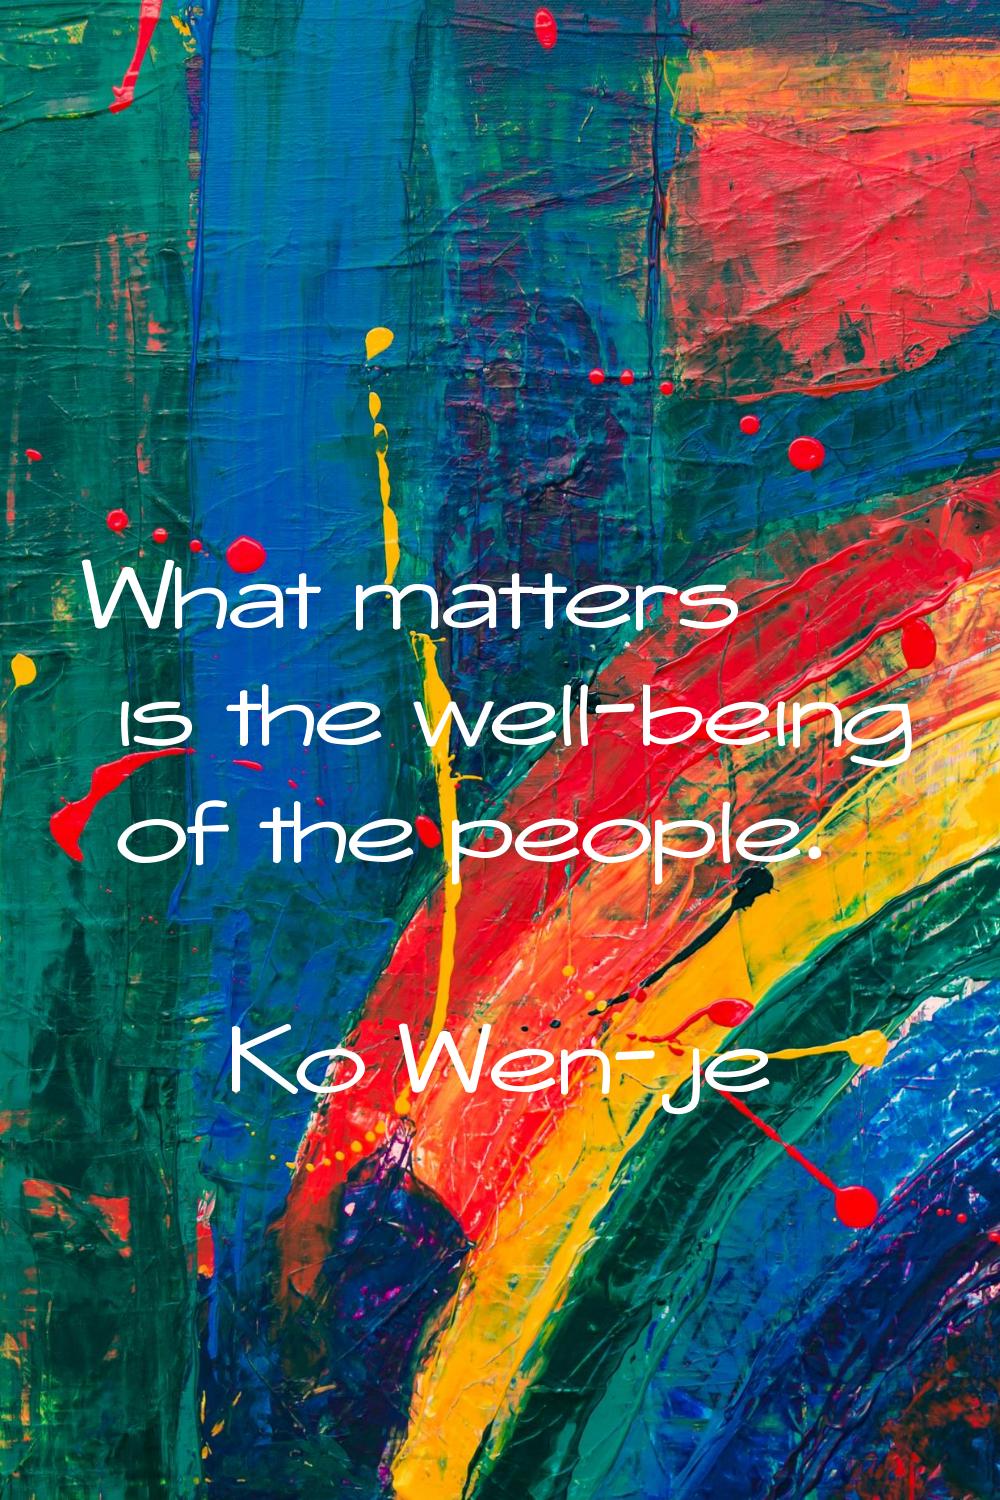 What matters is the well-being of the people.